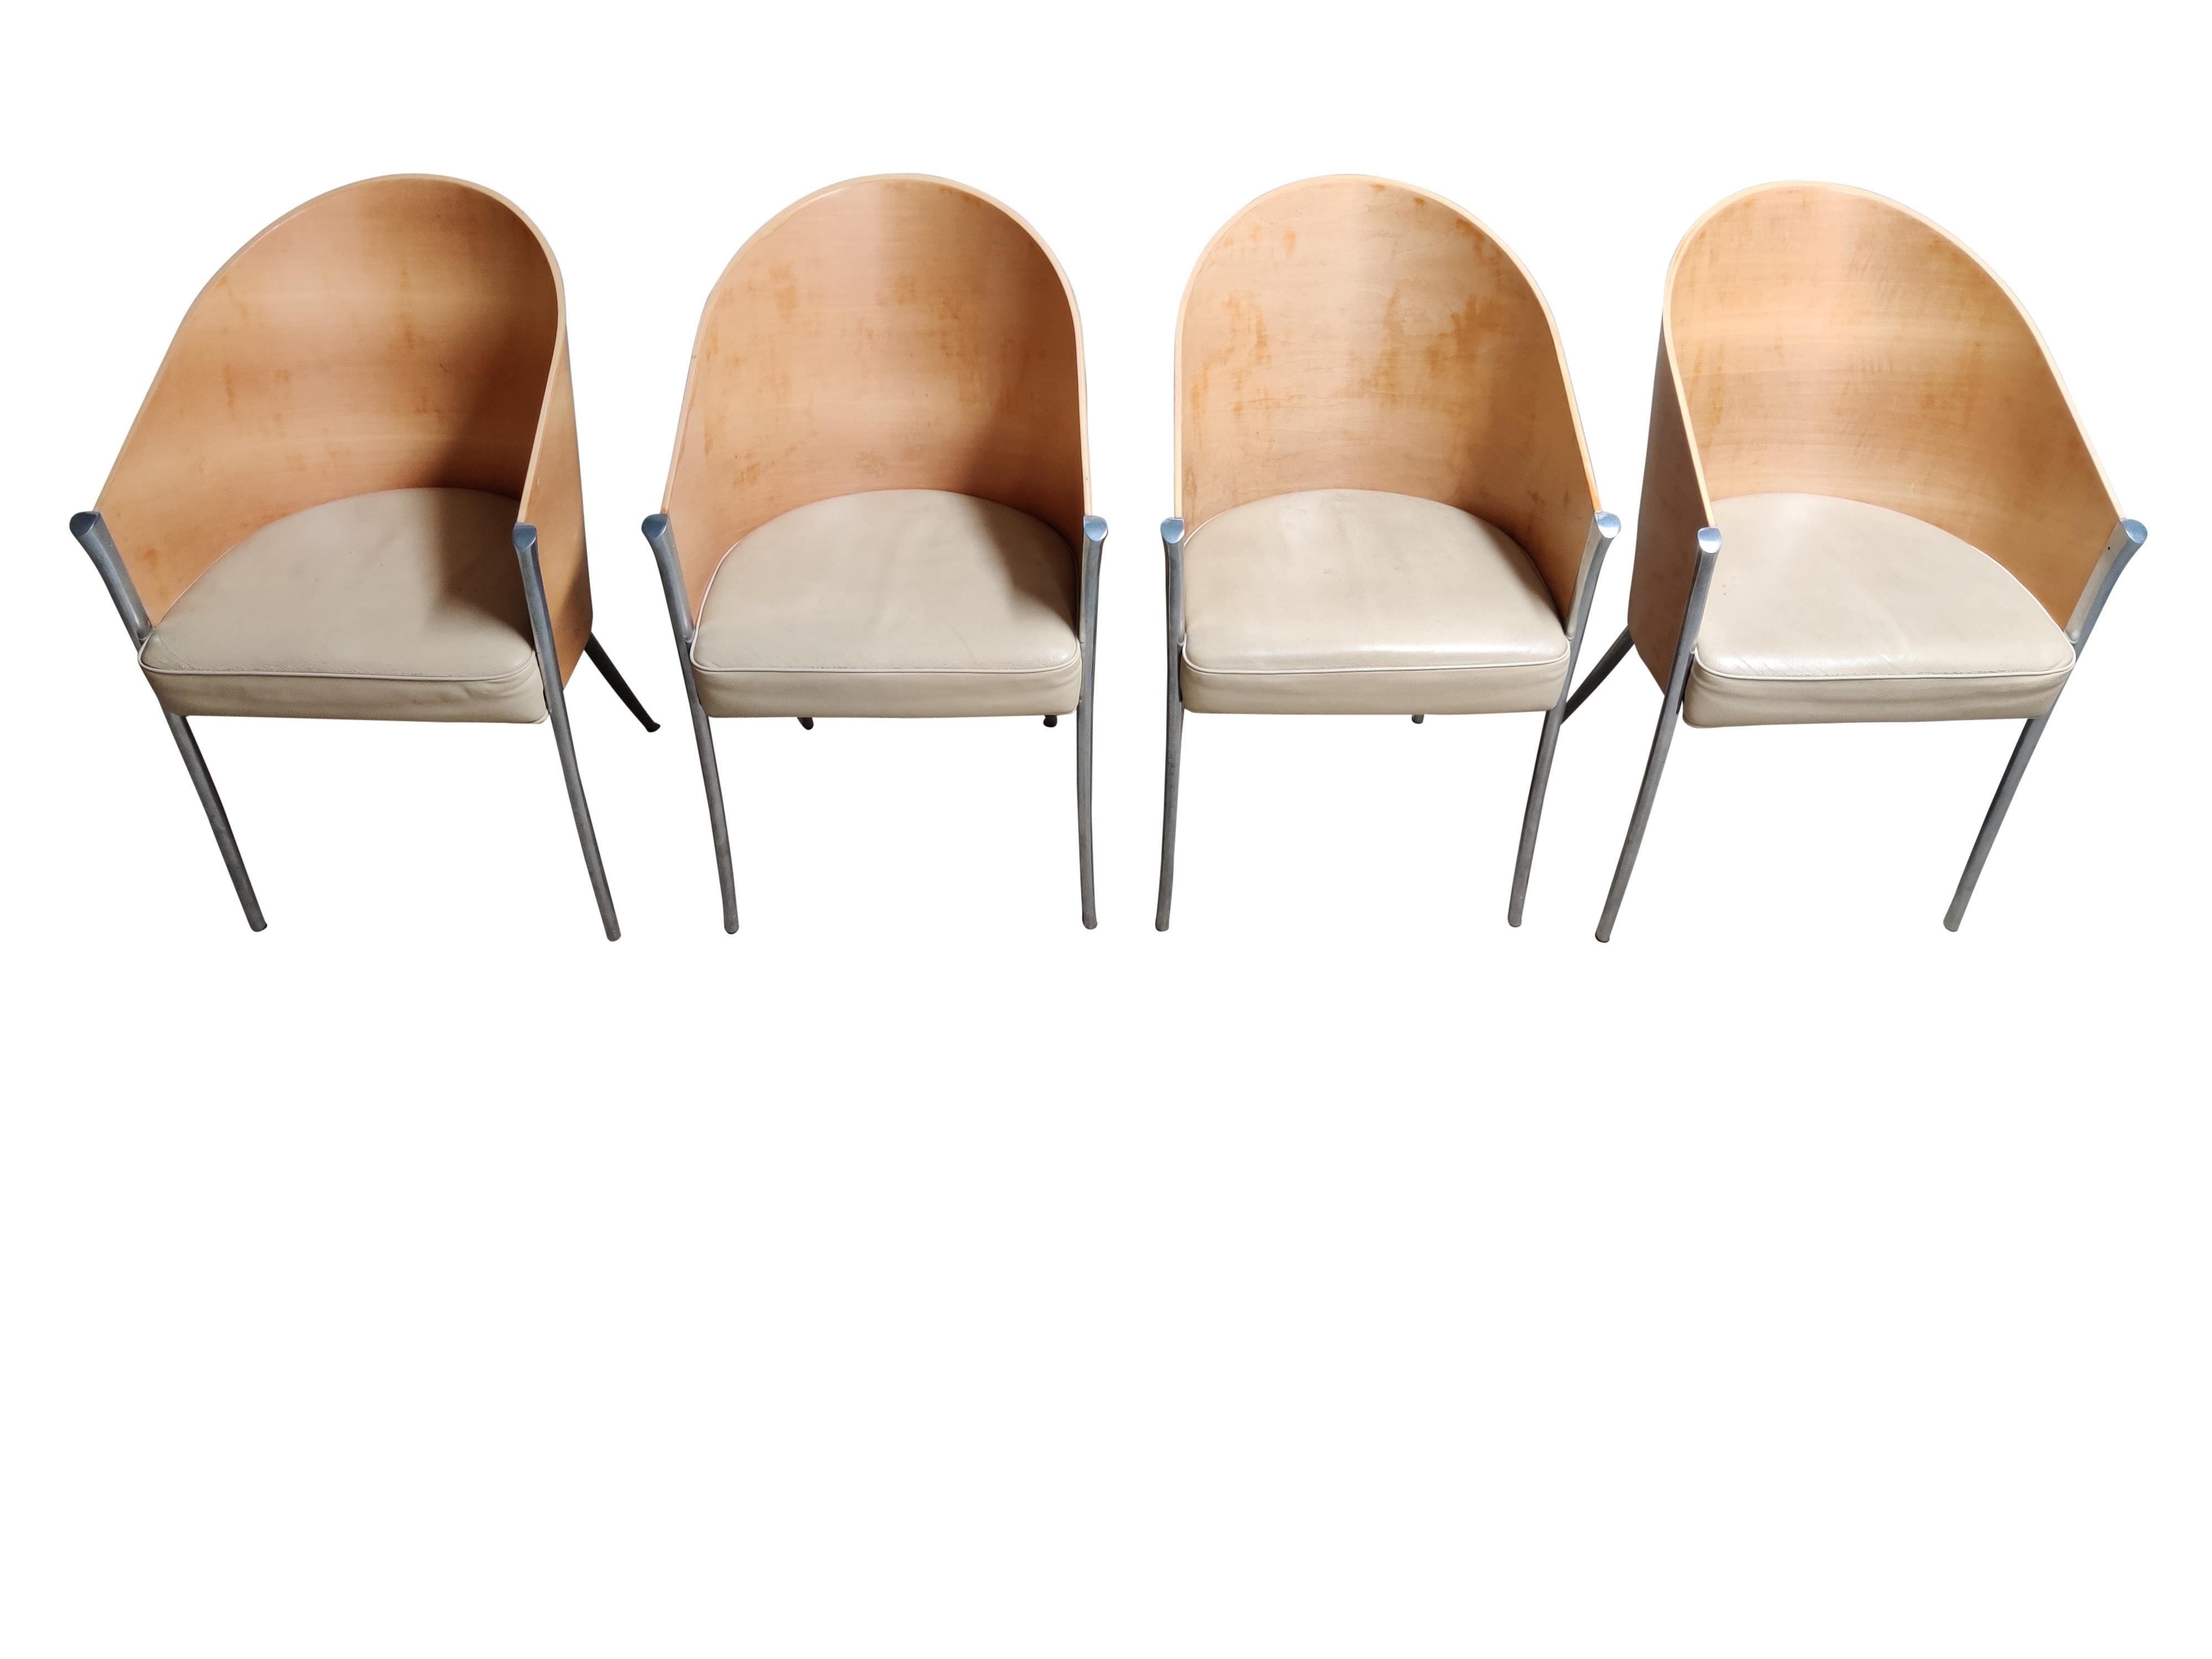 This set of 4 king Costes is the second version of the Costes chair, featuring 4 legs rather than the original three.

Walnut wooden chair with sand color leather seats and an elegant cast aluminum frame.

The chairs are in good